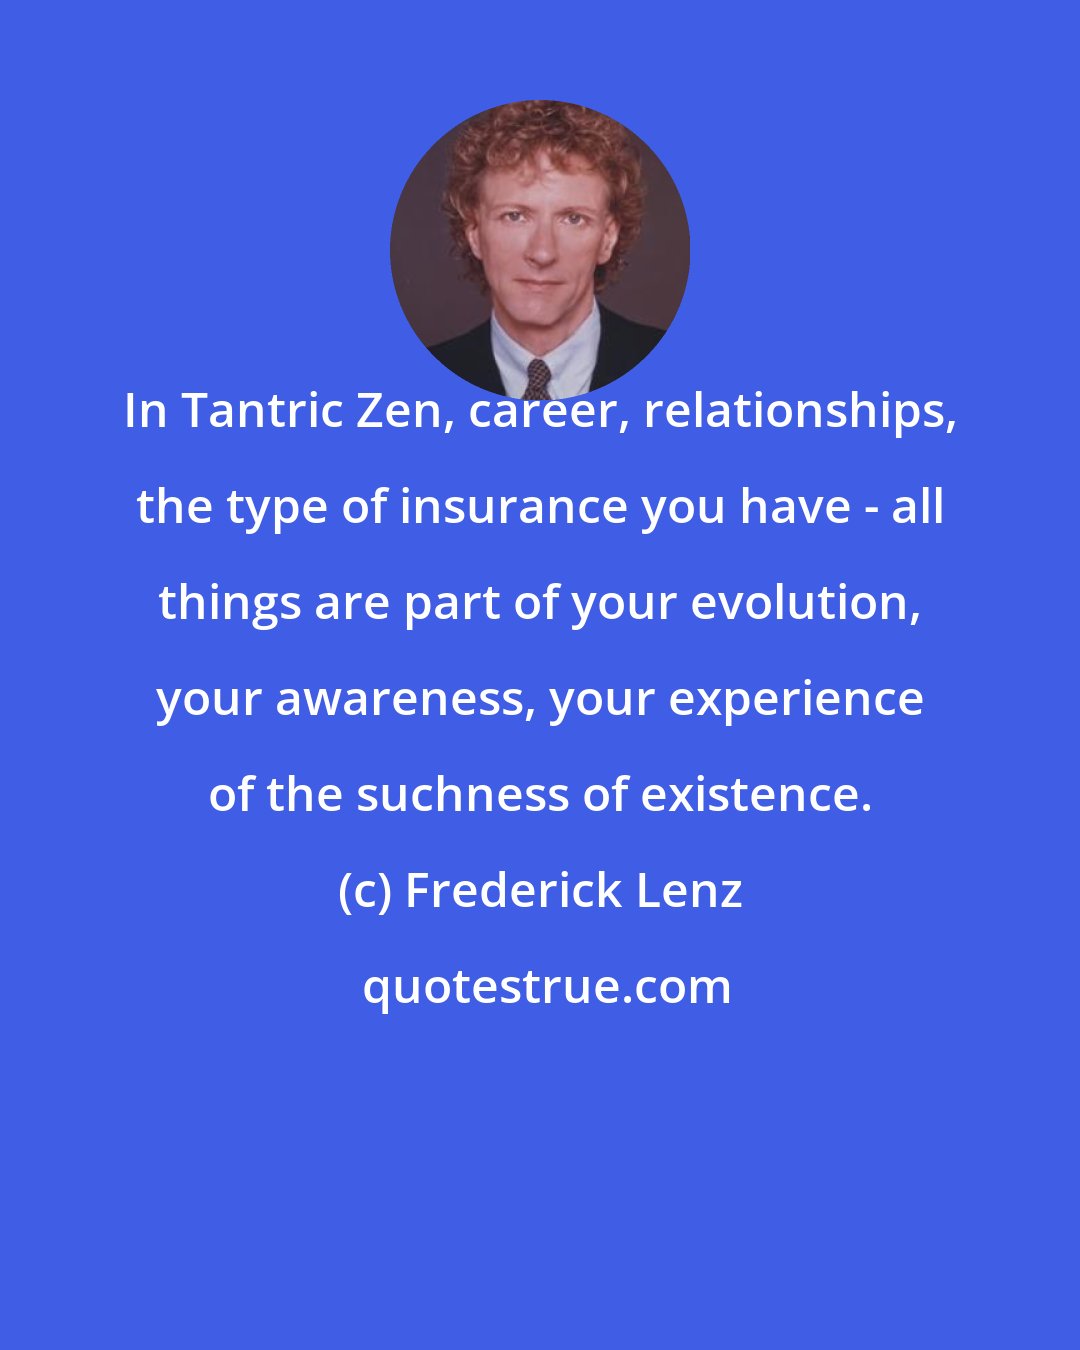 Frederick Lenz: In Tantric Zen, career, relationships, the type of insurance you have - all things are part of your evolution, your awareness, your experience of the suchness of existence.